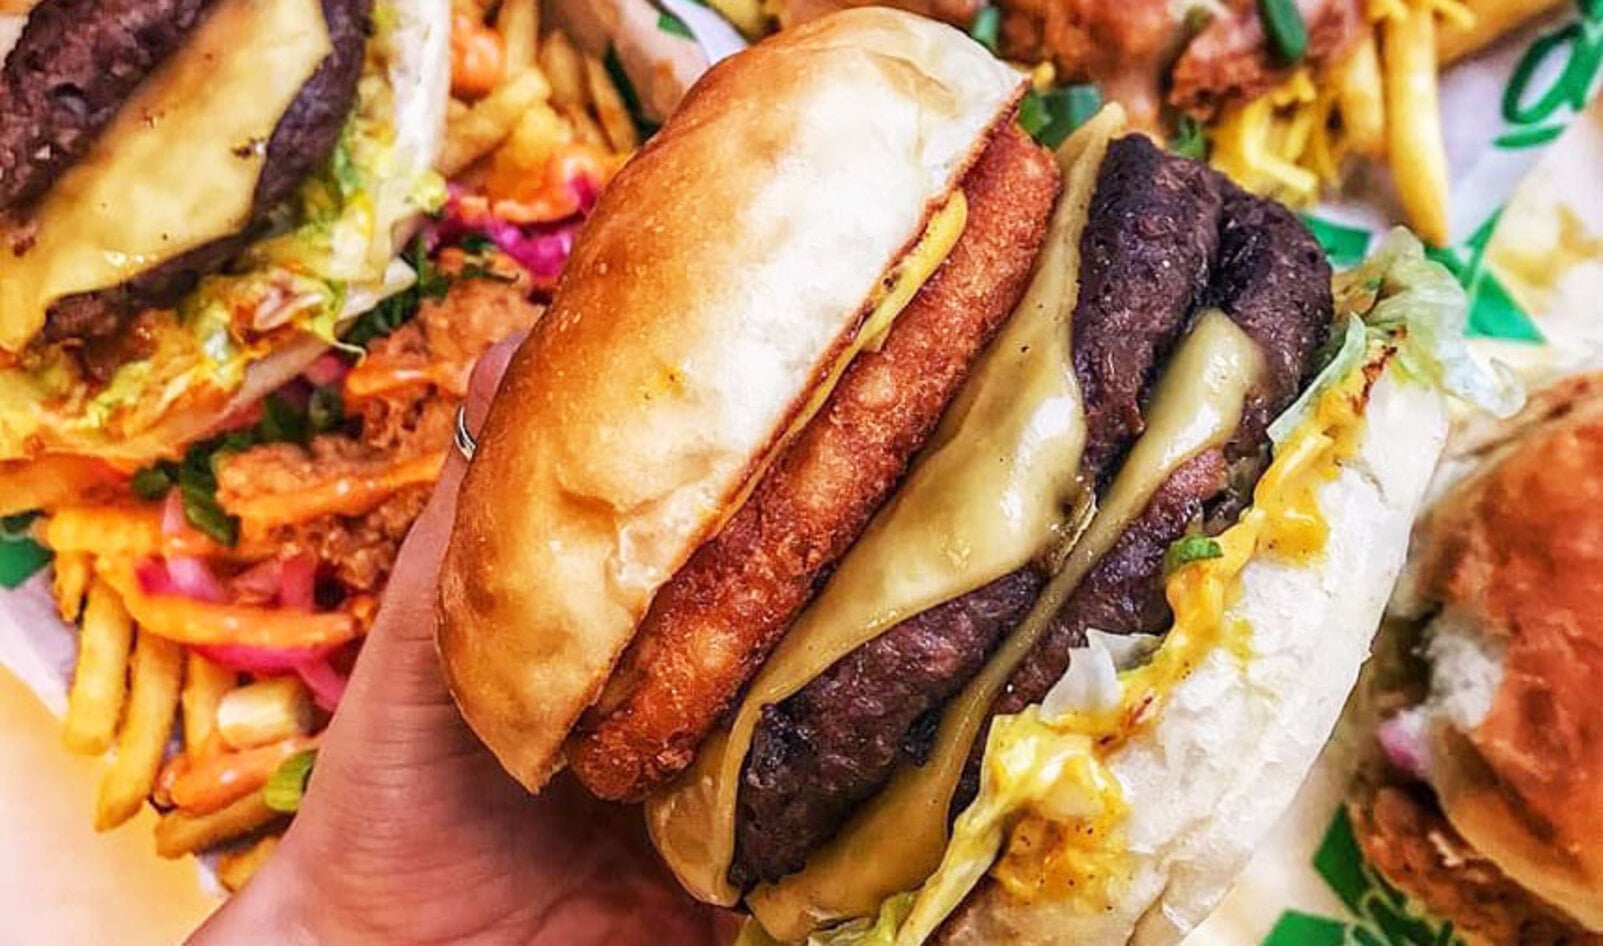 UK Diner Chain Closes Meat-Serving Location to Go Vegan